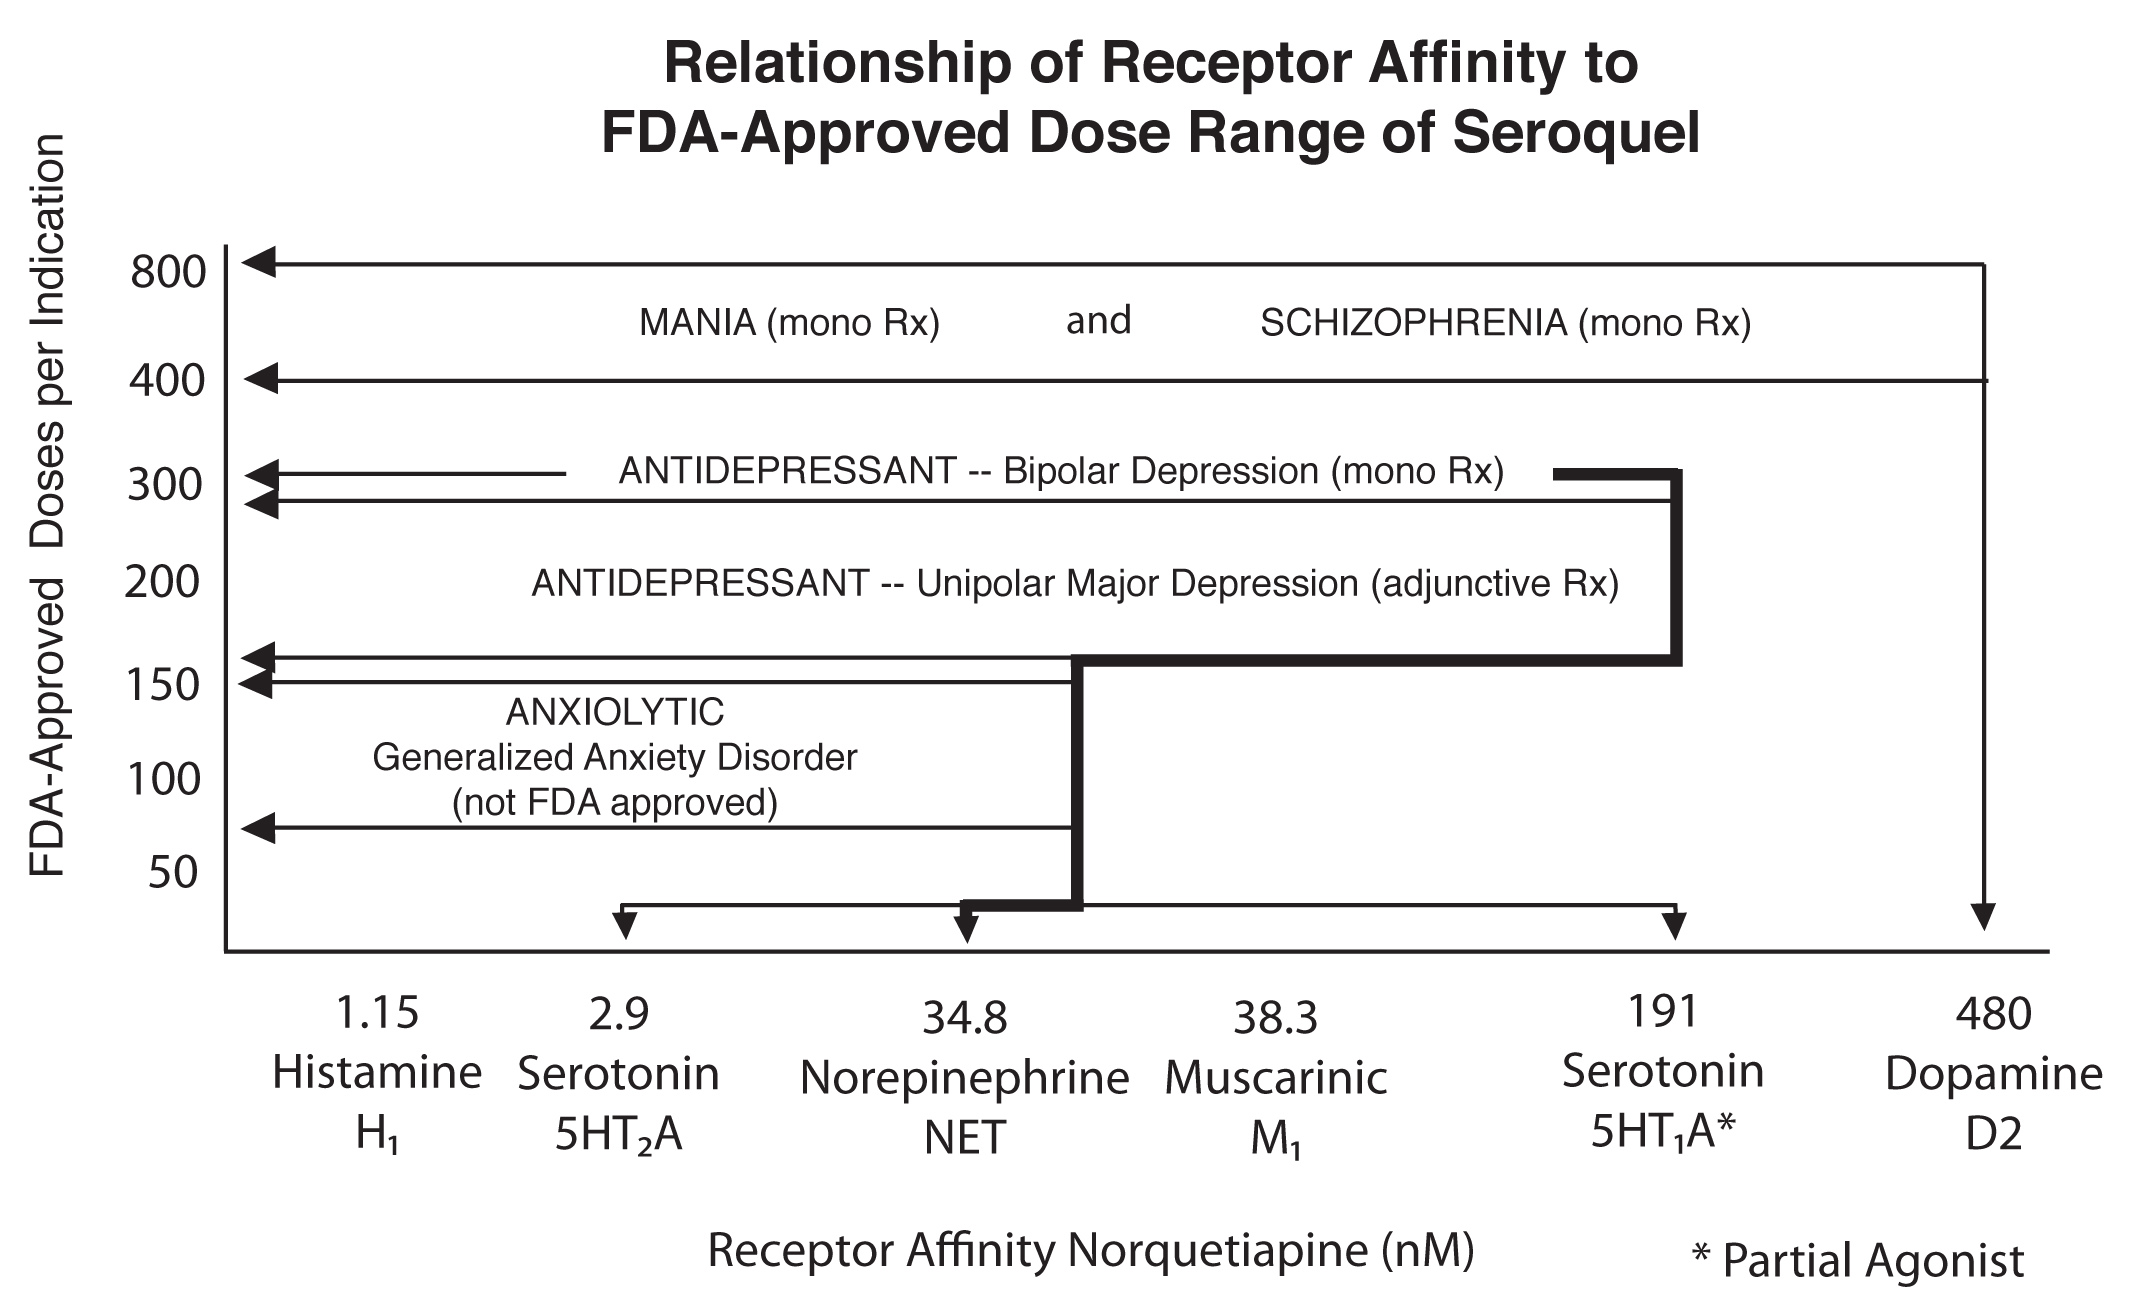 relationship-of-receptor-affinity-to-dos